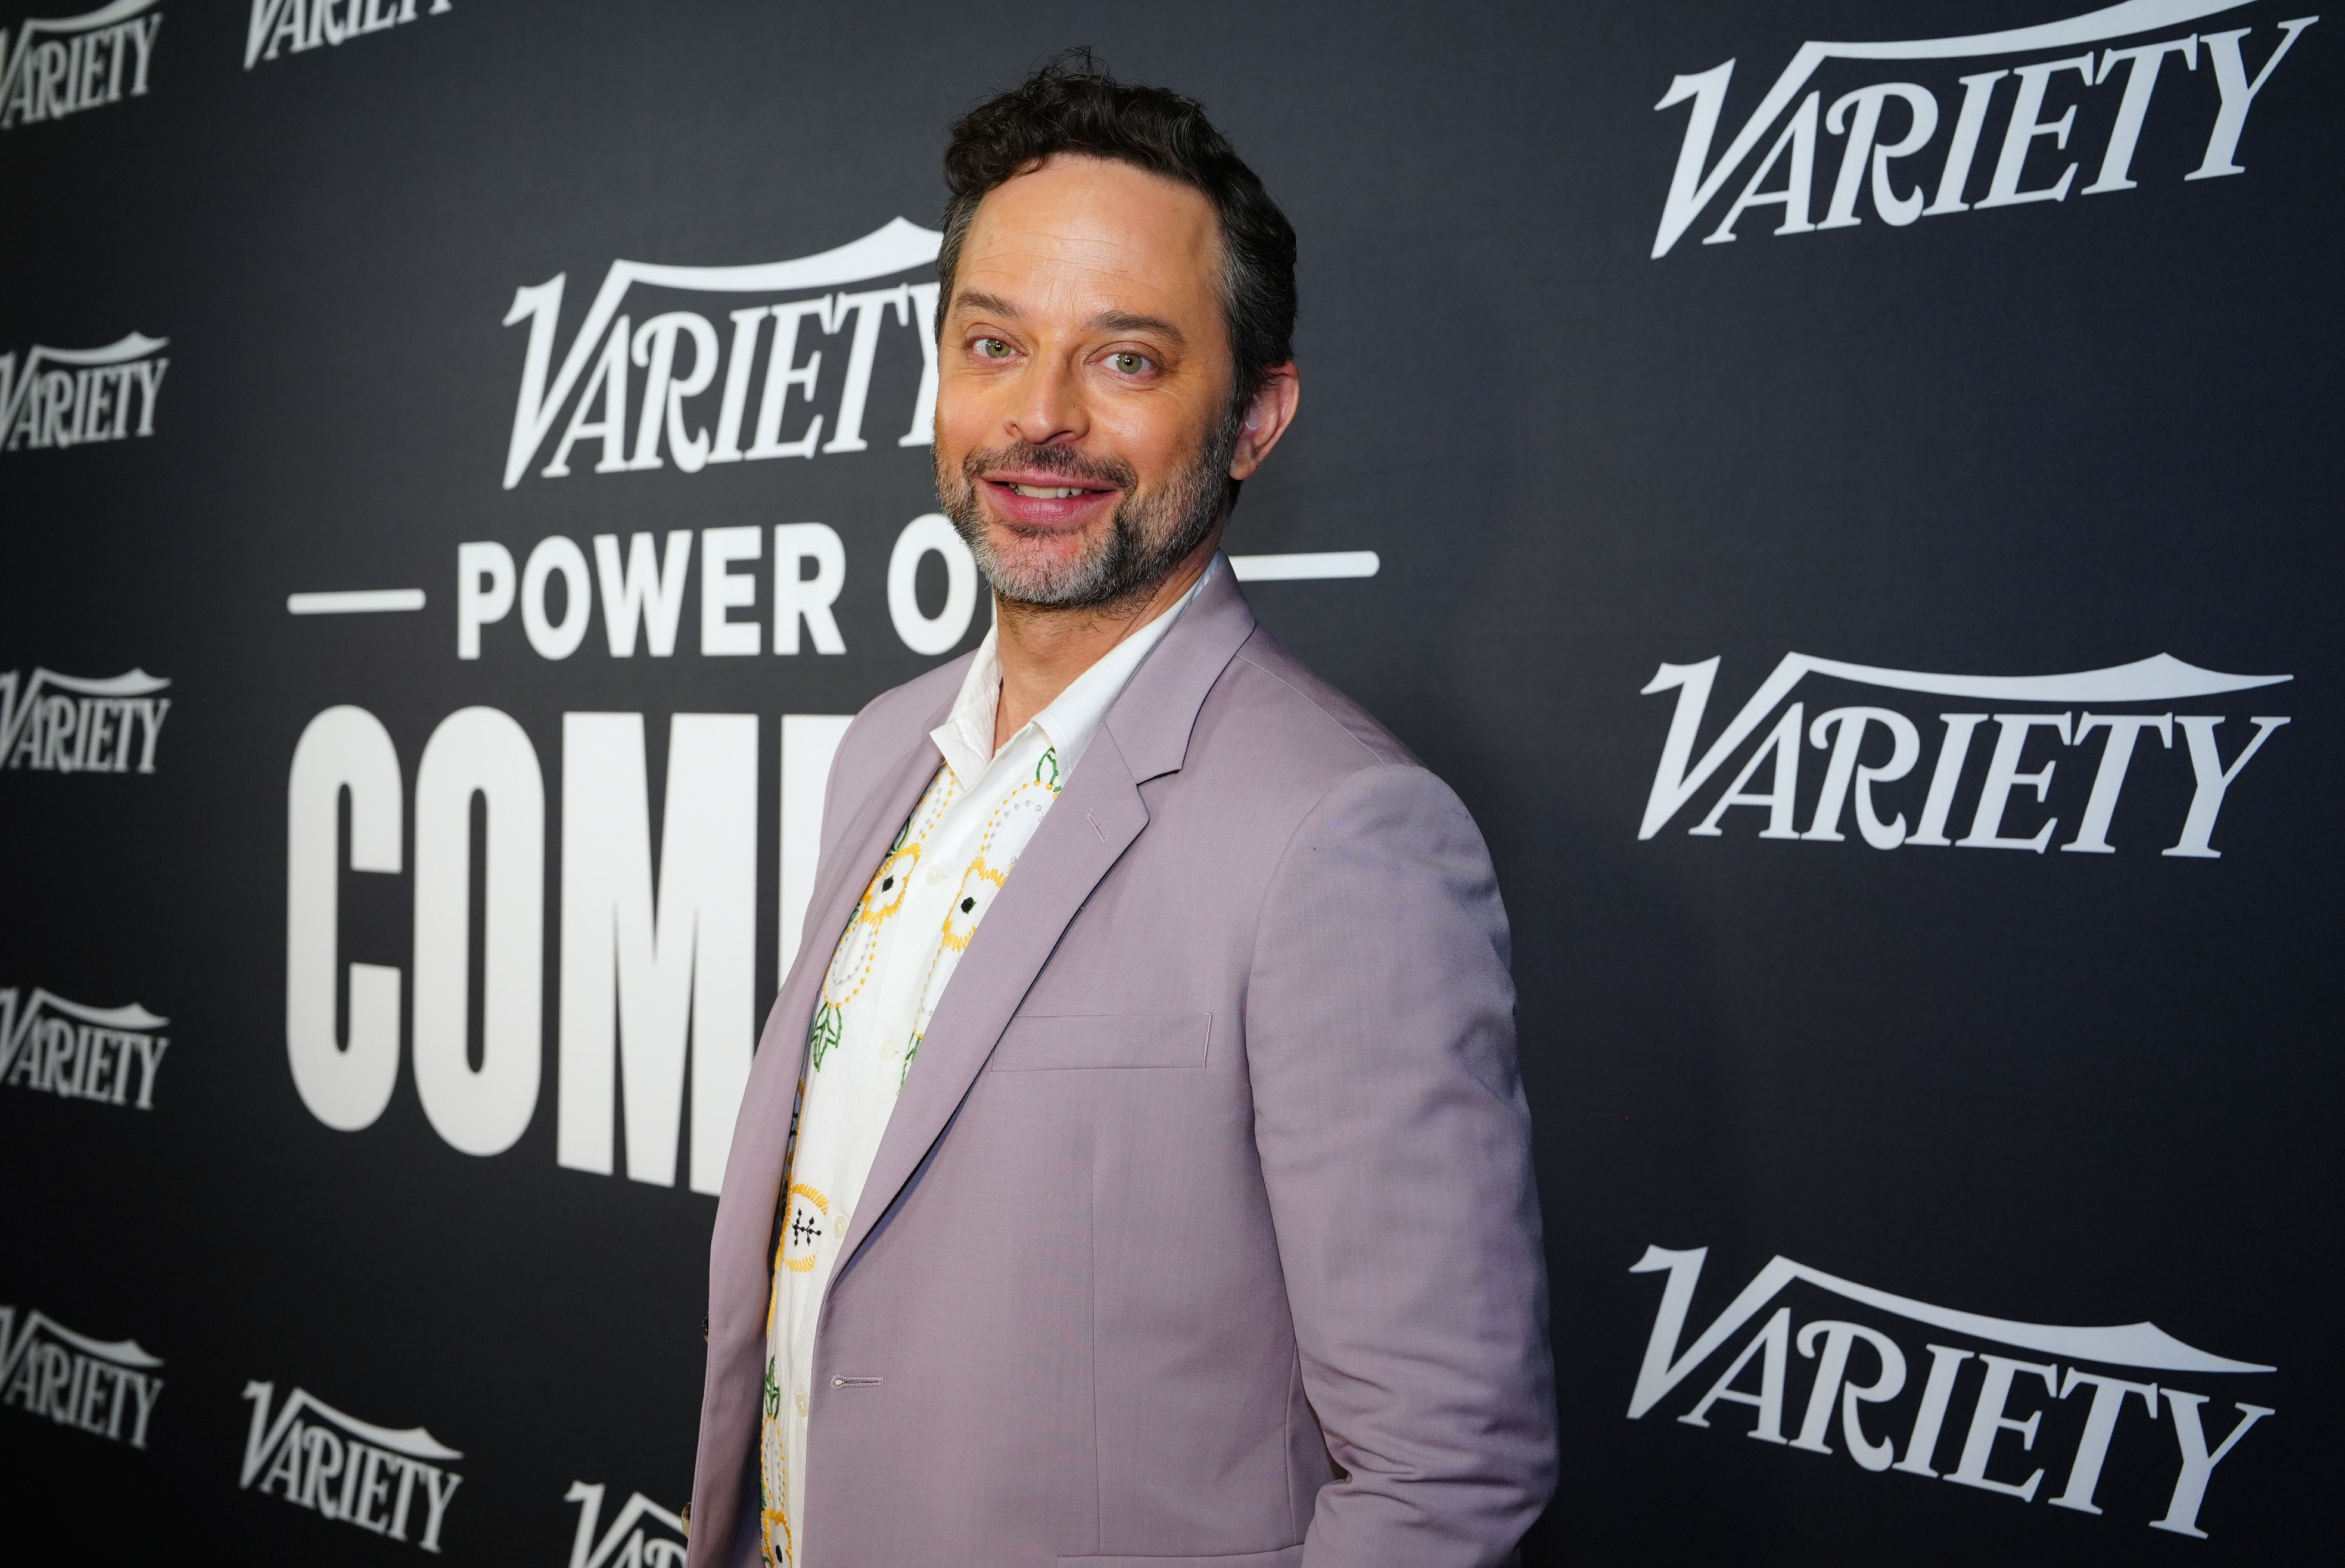 Nick Kroll poses at Variety&#x27;s Power of Comedy event wearing a light jacket and patterned tie